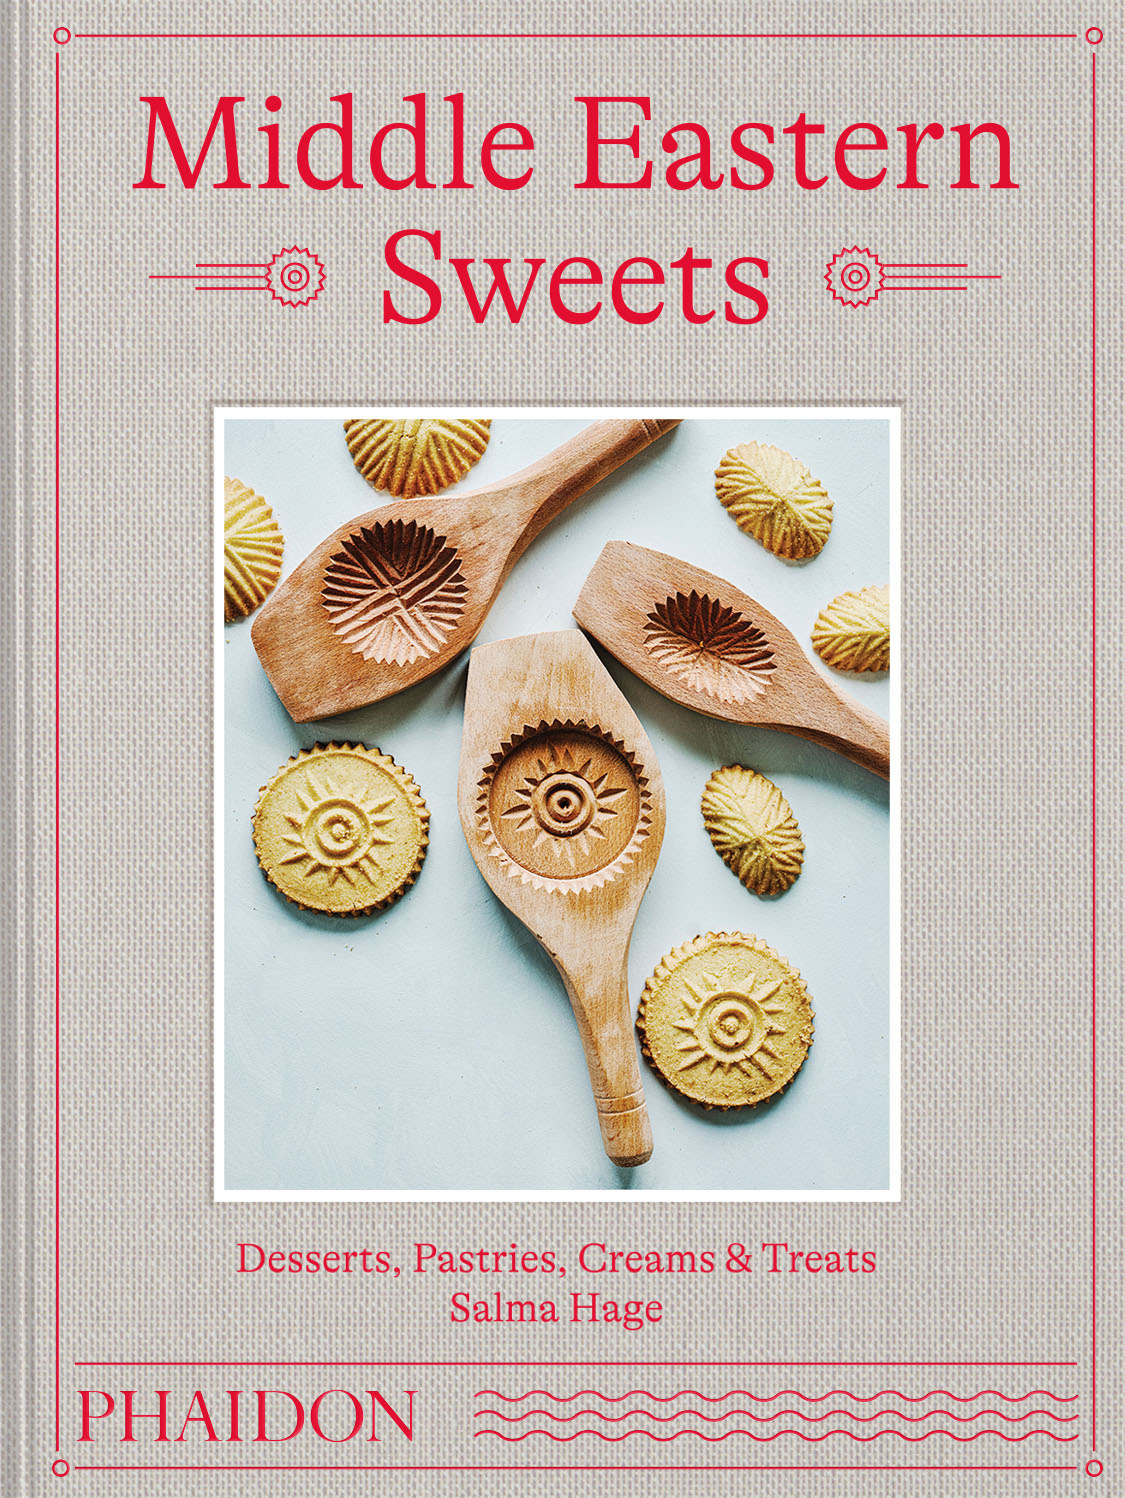 Book cover of Middle Eastern Sweets by Salma Hage